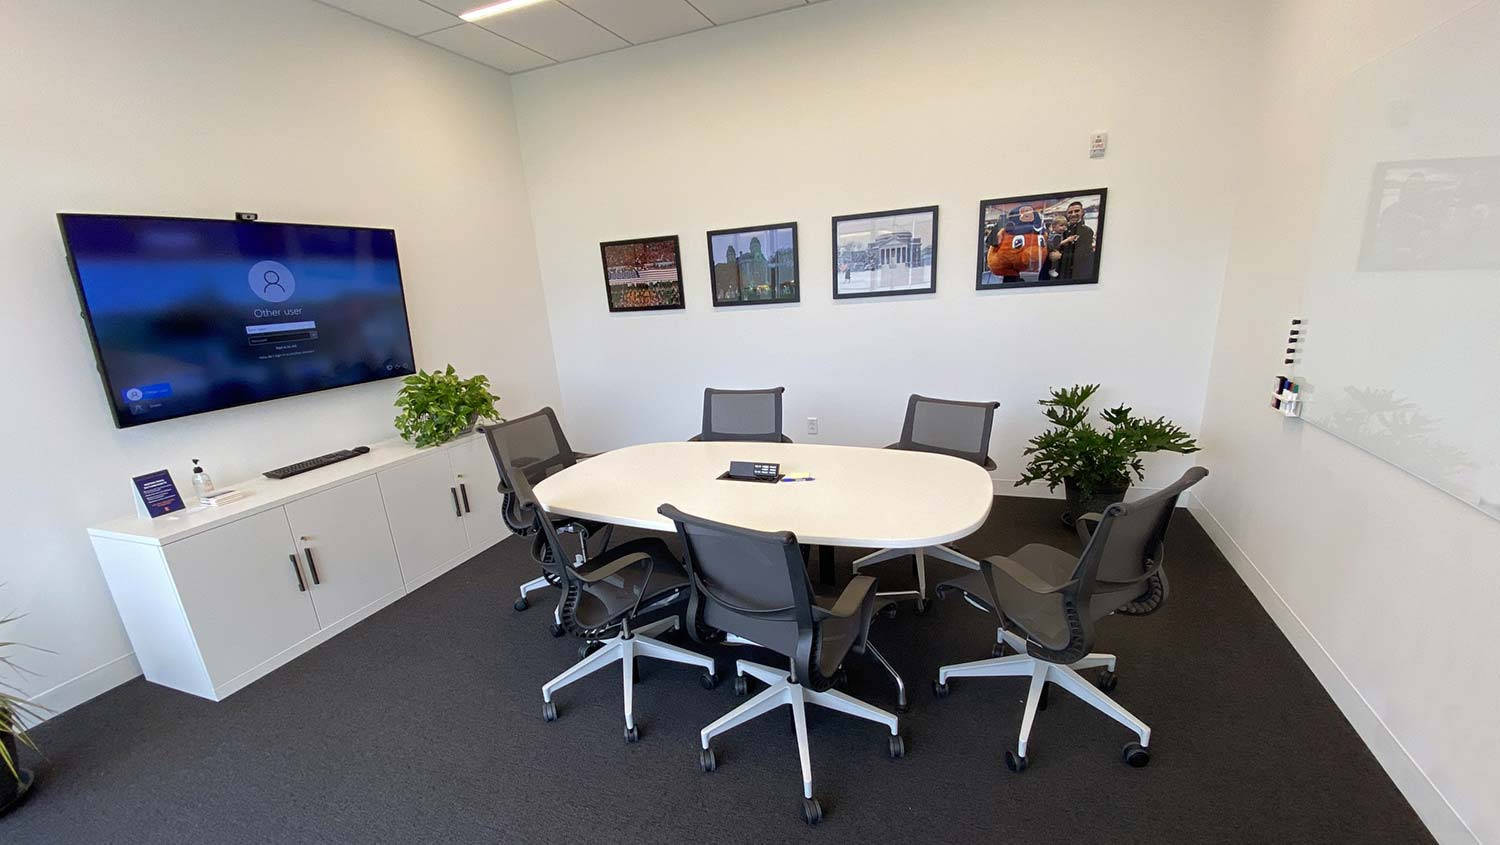 NVRC Conference Room 301 is typical of the more formal meeting spaces within the NVRC and includes an Extron EBP 1200C Cable Cubby enclosure with an integrated eBUS button panel for room control.